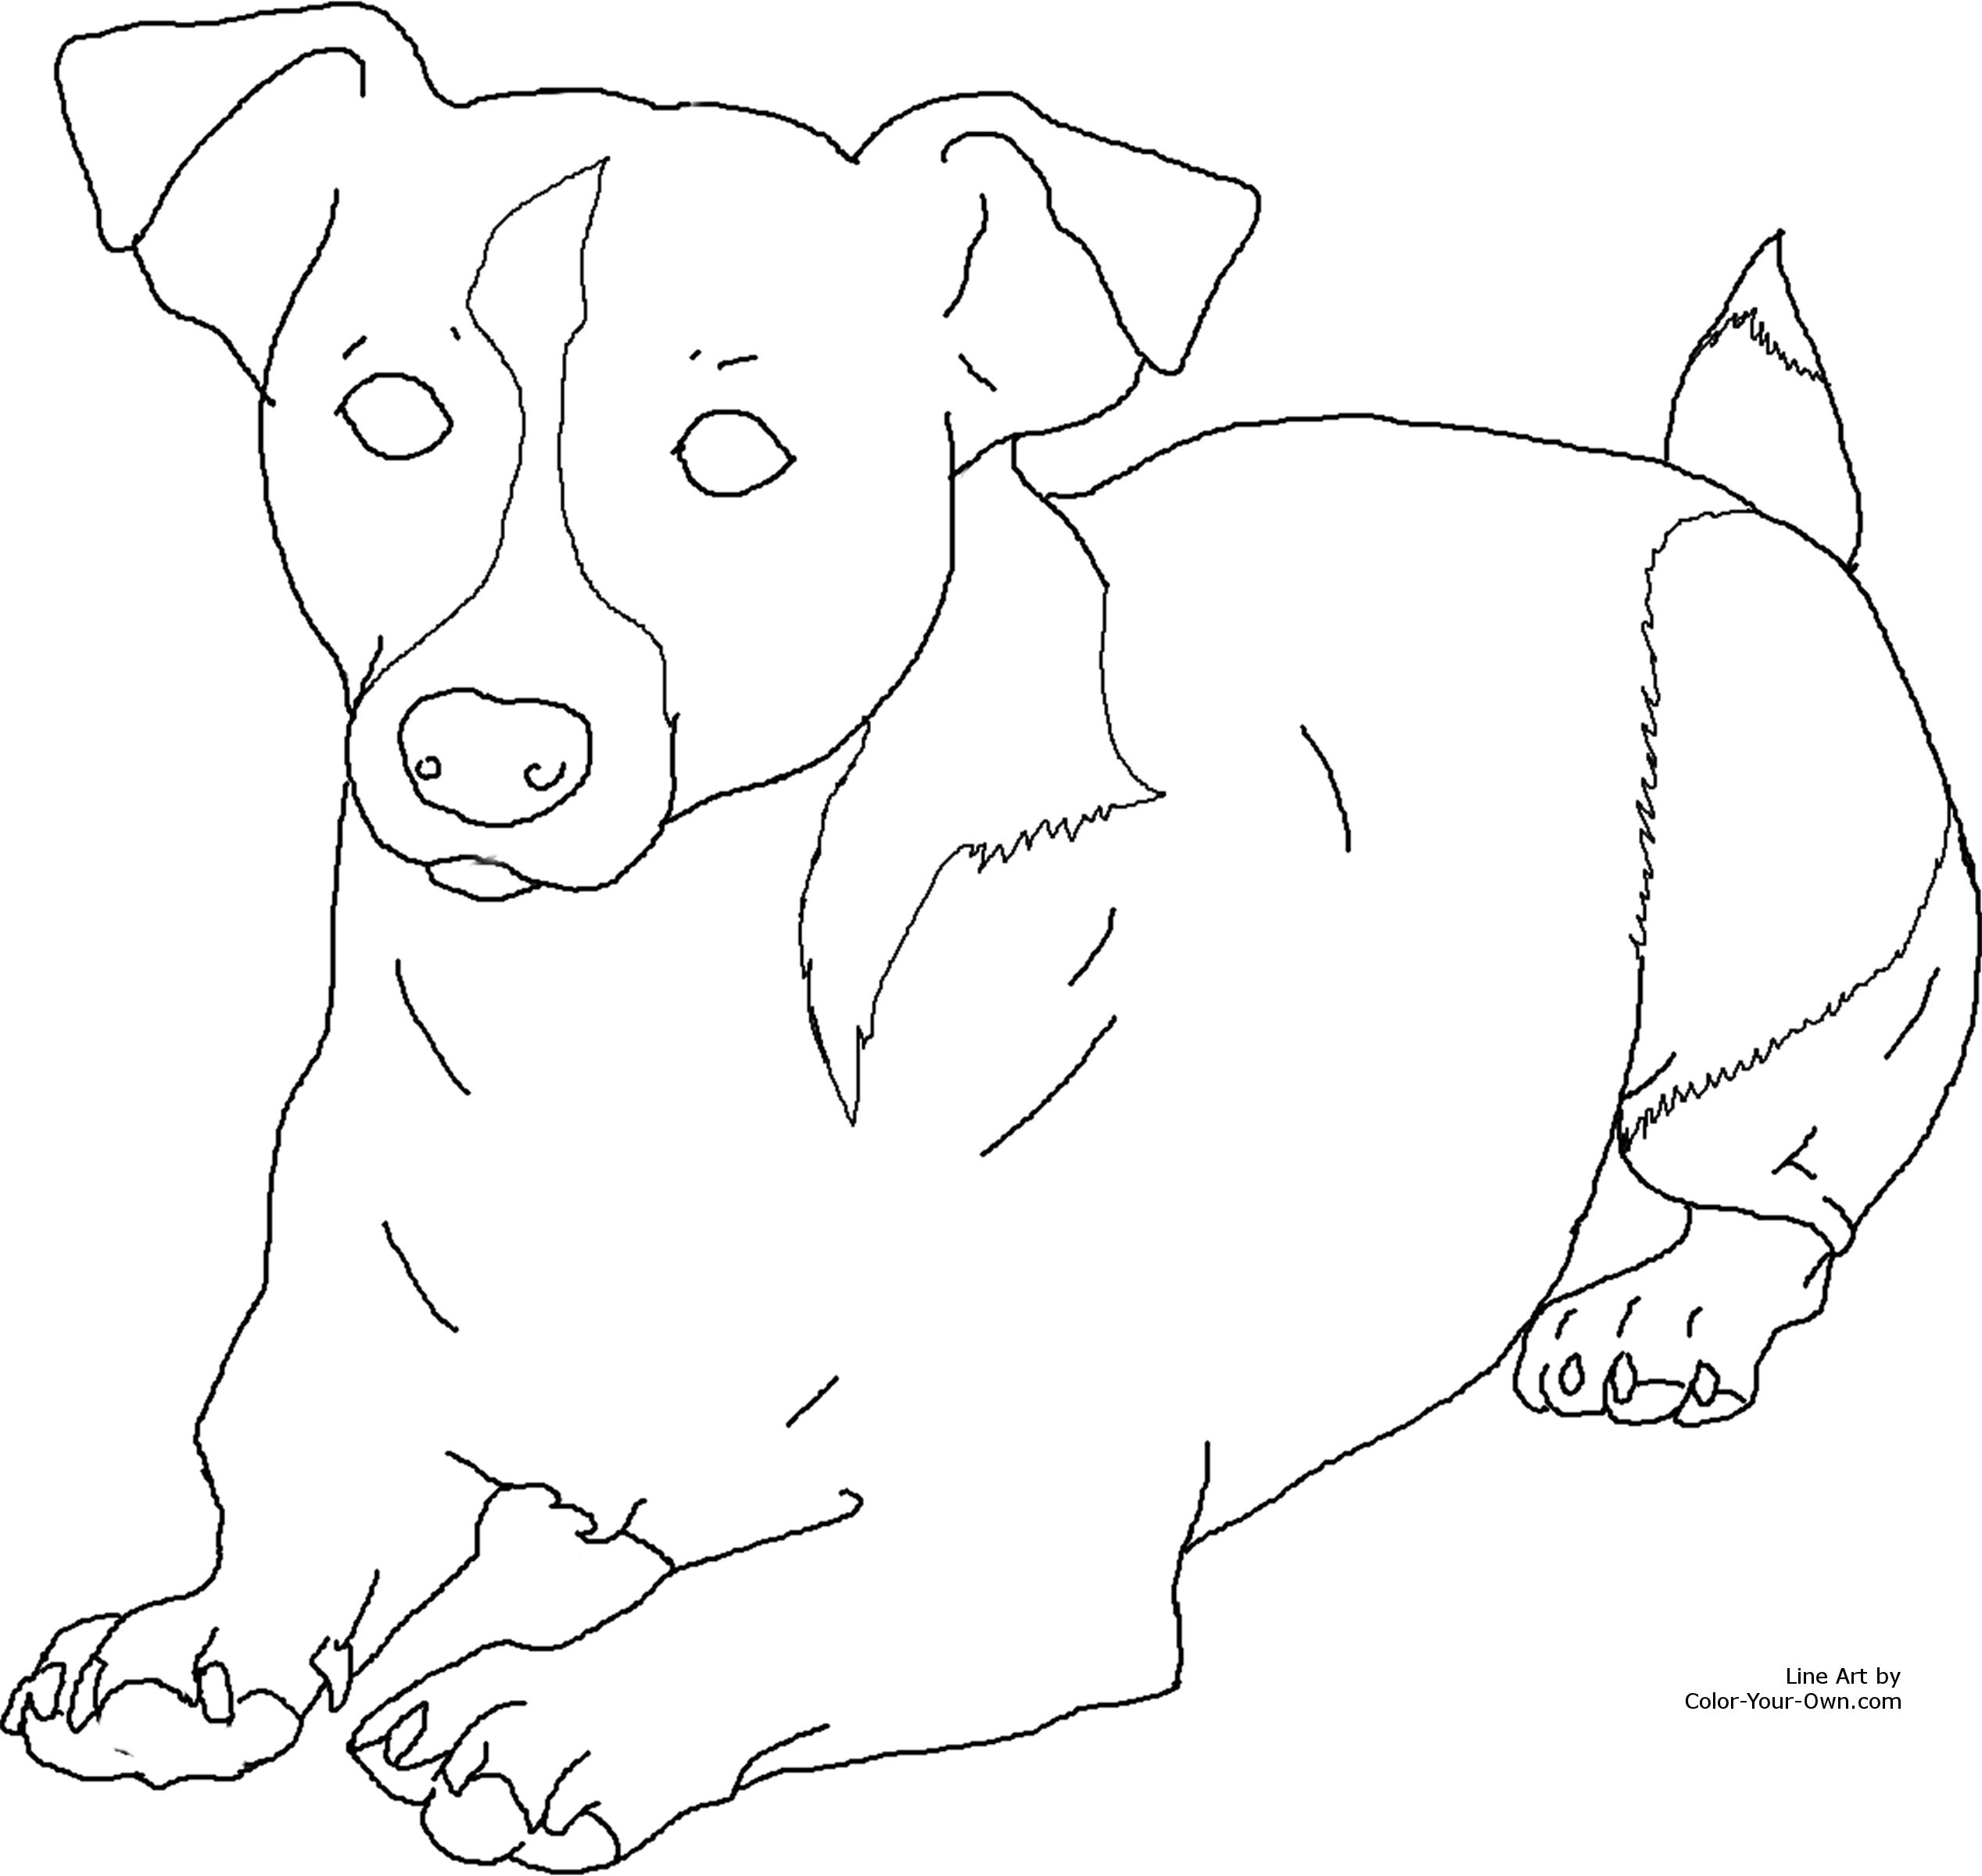 Jack Russel Terrier Dog Laying Down Coloring Page